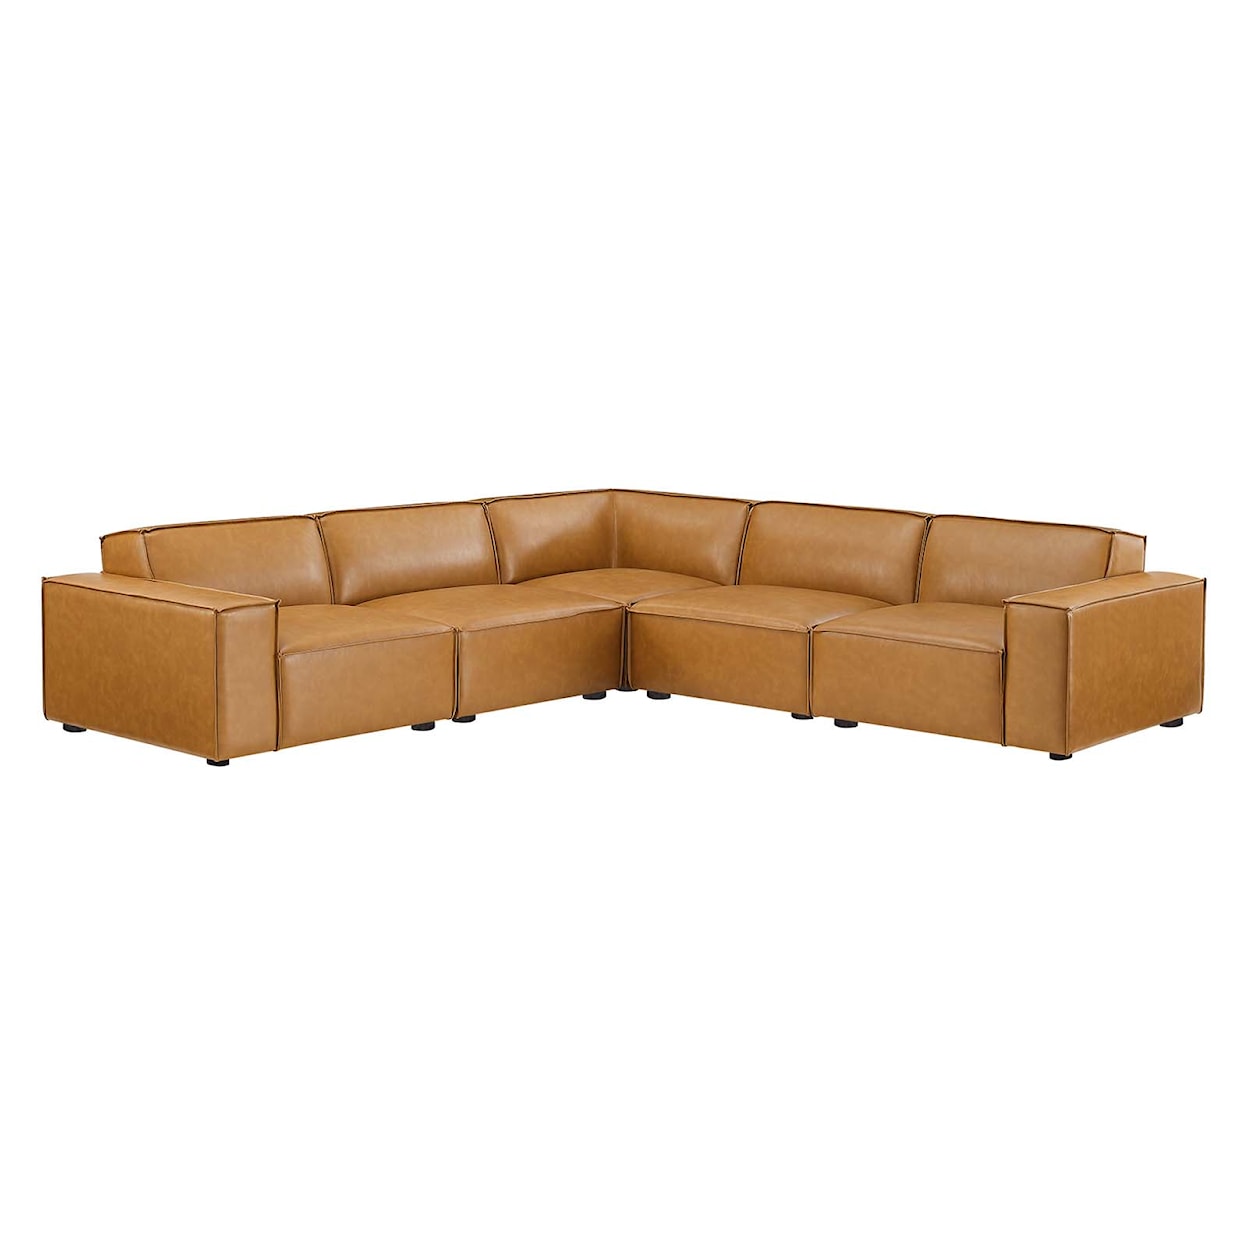 Modway Restore 5-Piece Sectional Sofa